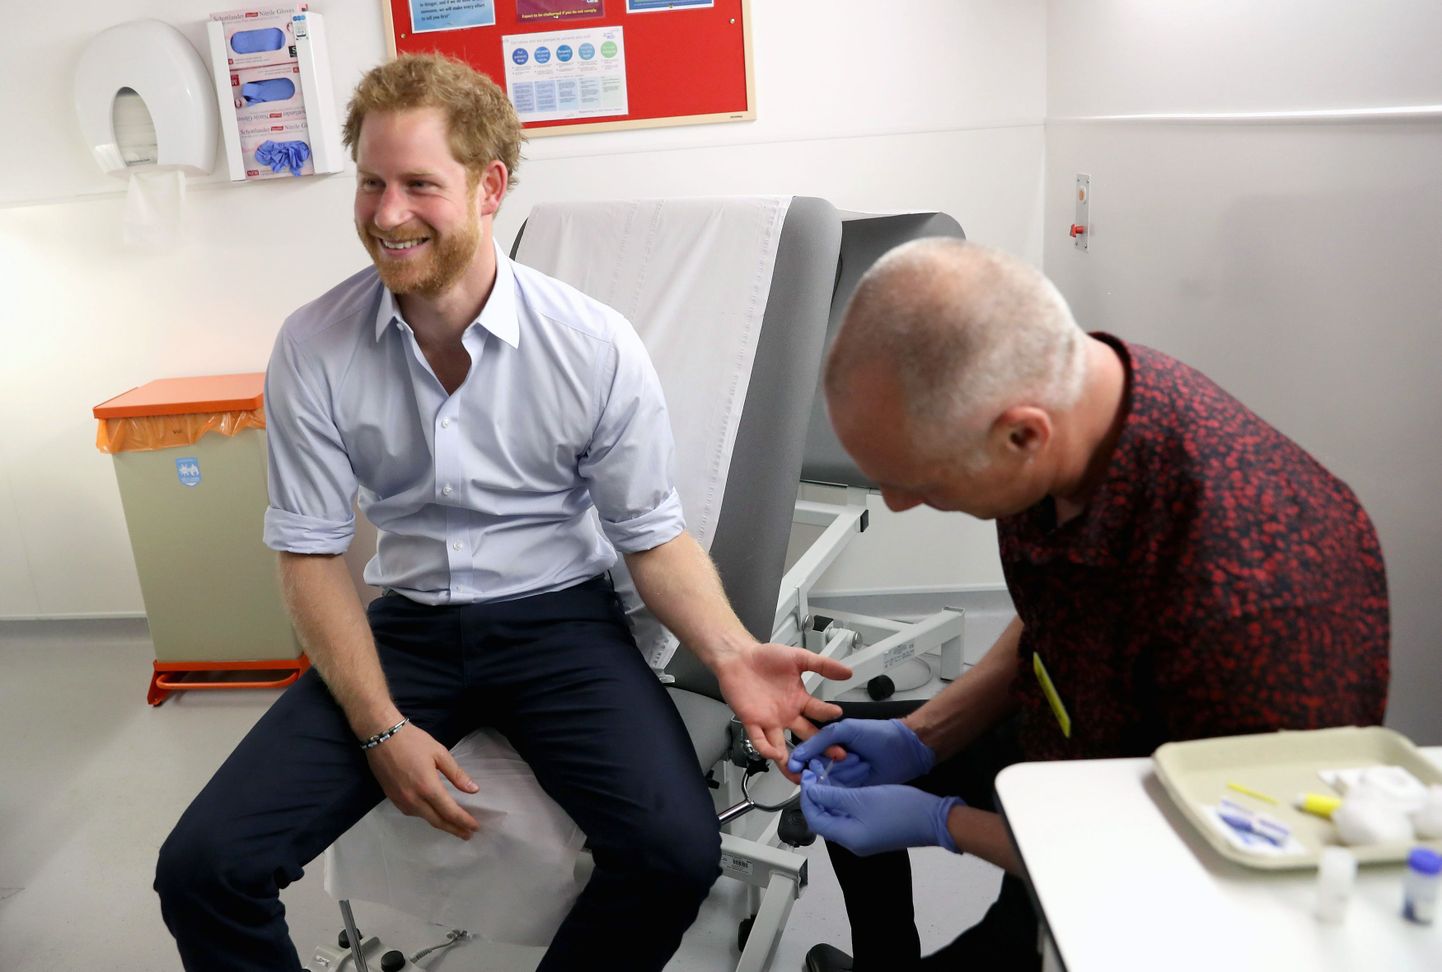 Britain's Prince Harry has blood taken for an HIV test, administered by Specialist Psychotherapist Robert Palmer during a visit to highlight the fight against HIV and AIDS, at the Burrell Street Sexual Health Centre in Southwark, London, Thursday, July 14, 2016. (Chris Jackson/PA via AP)